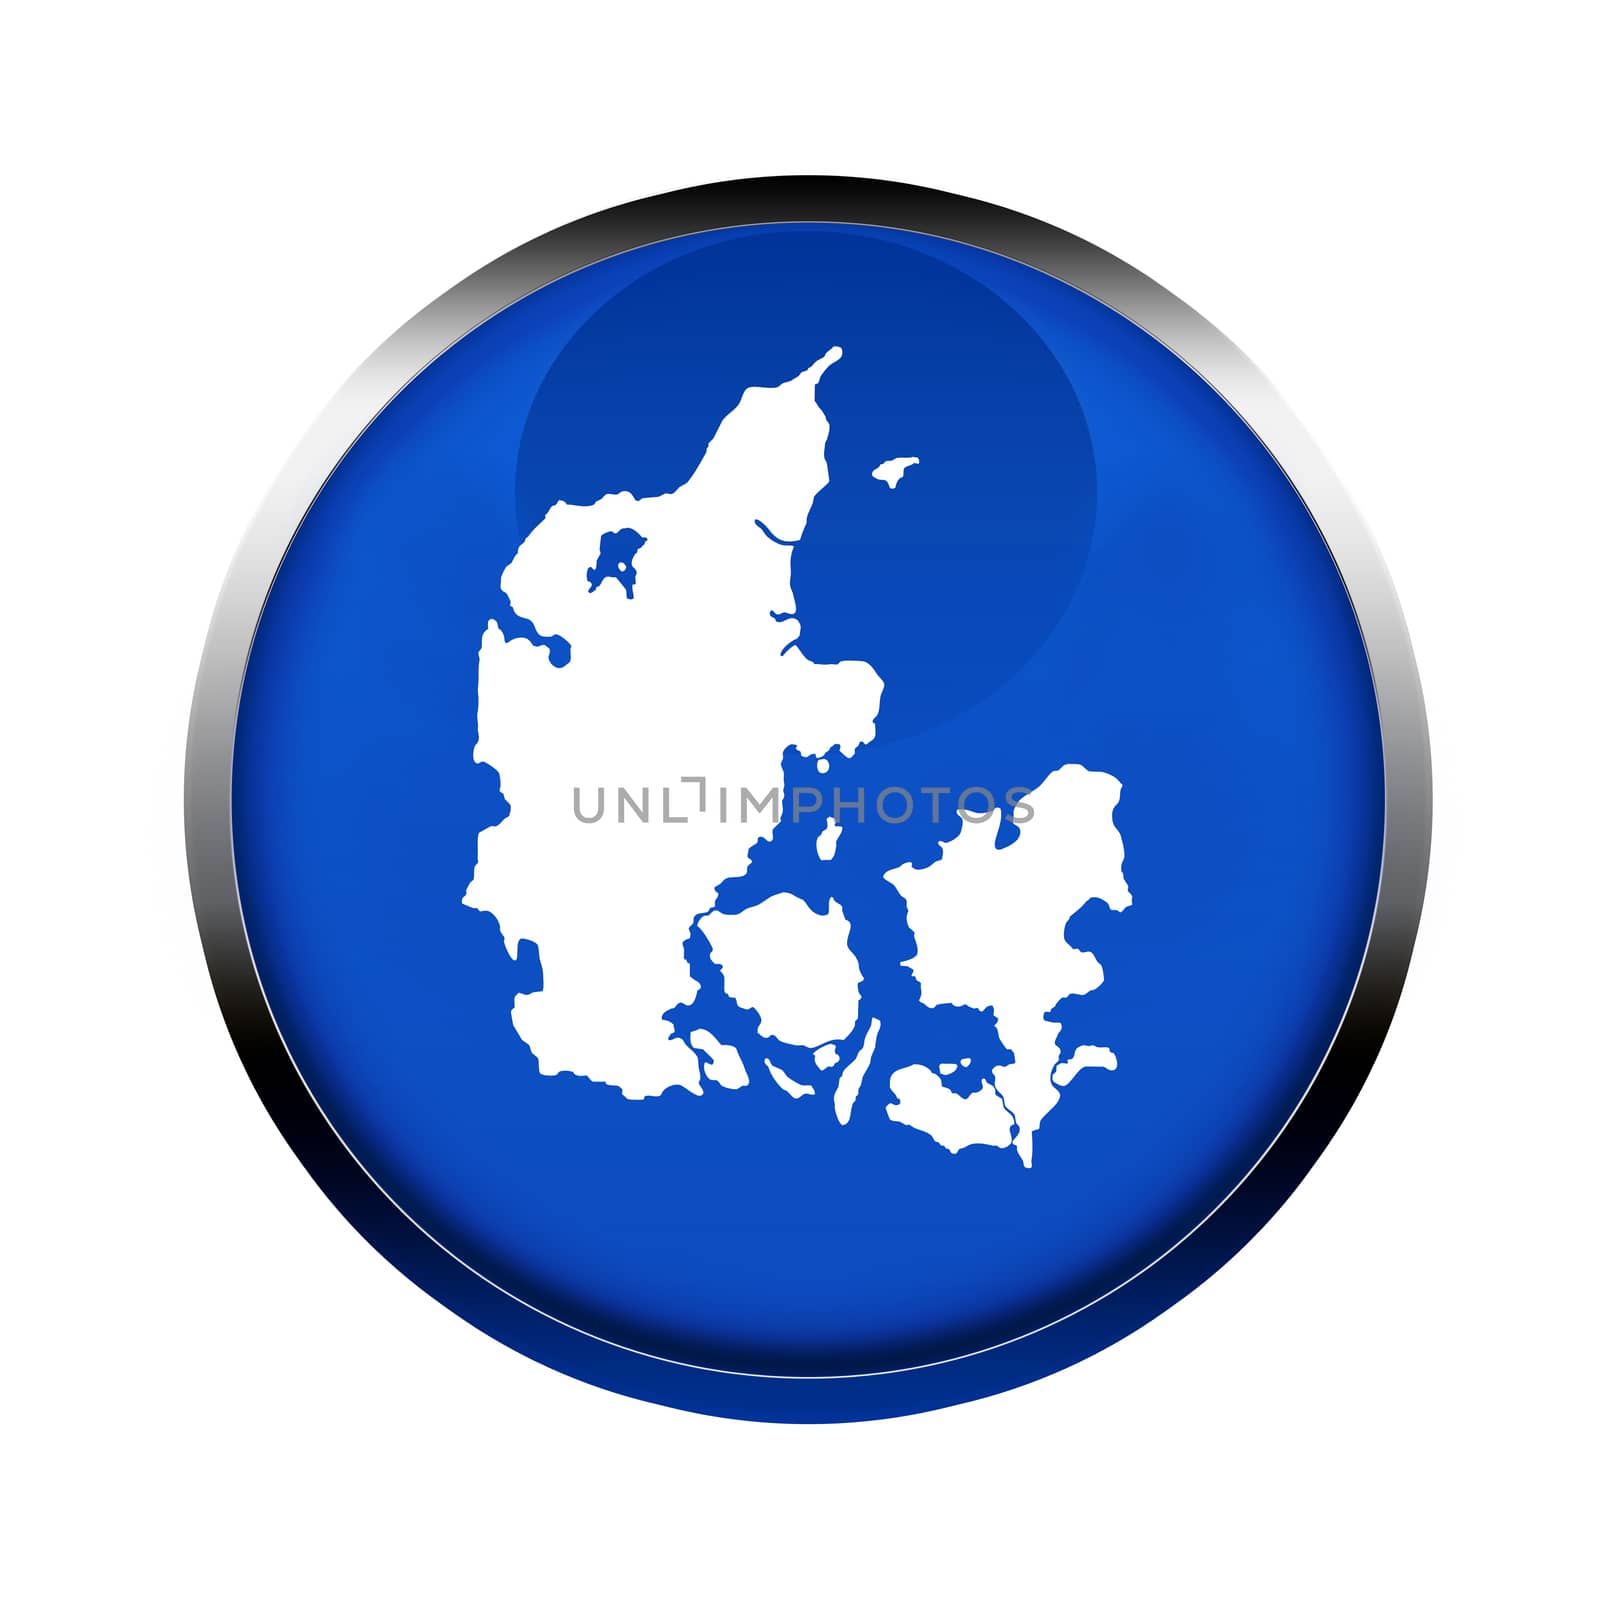 Denmark map button in the colors of the European Union.